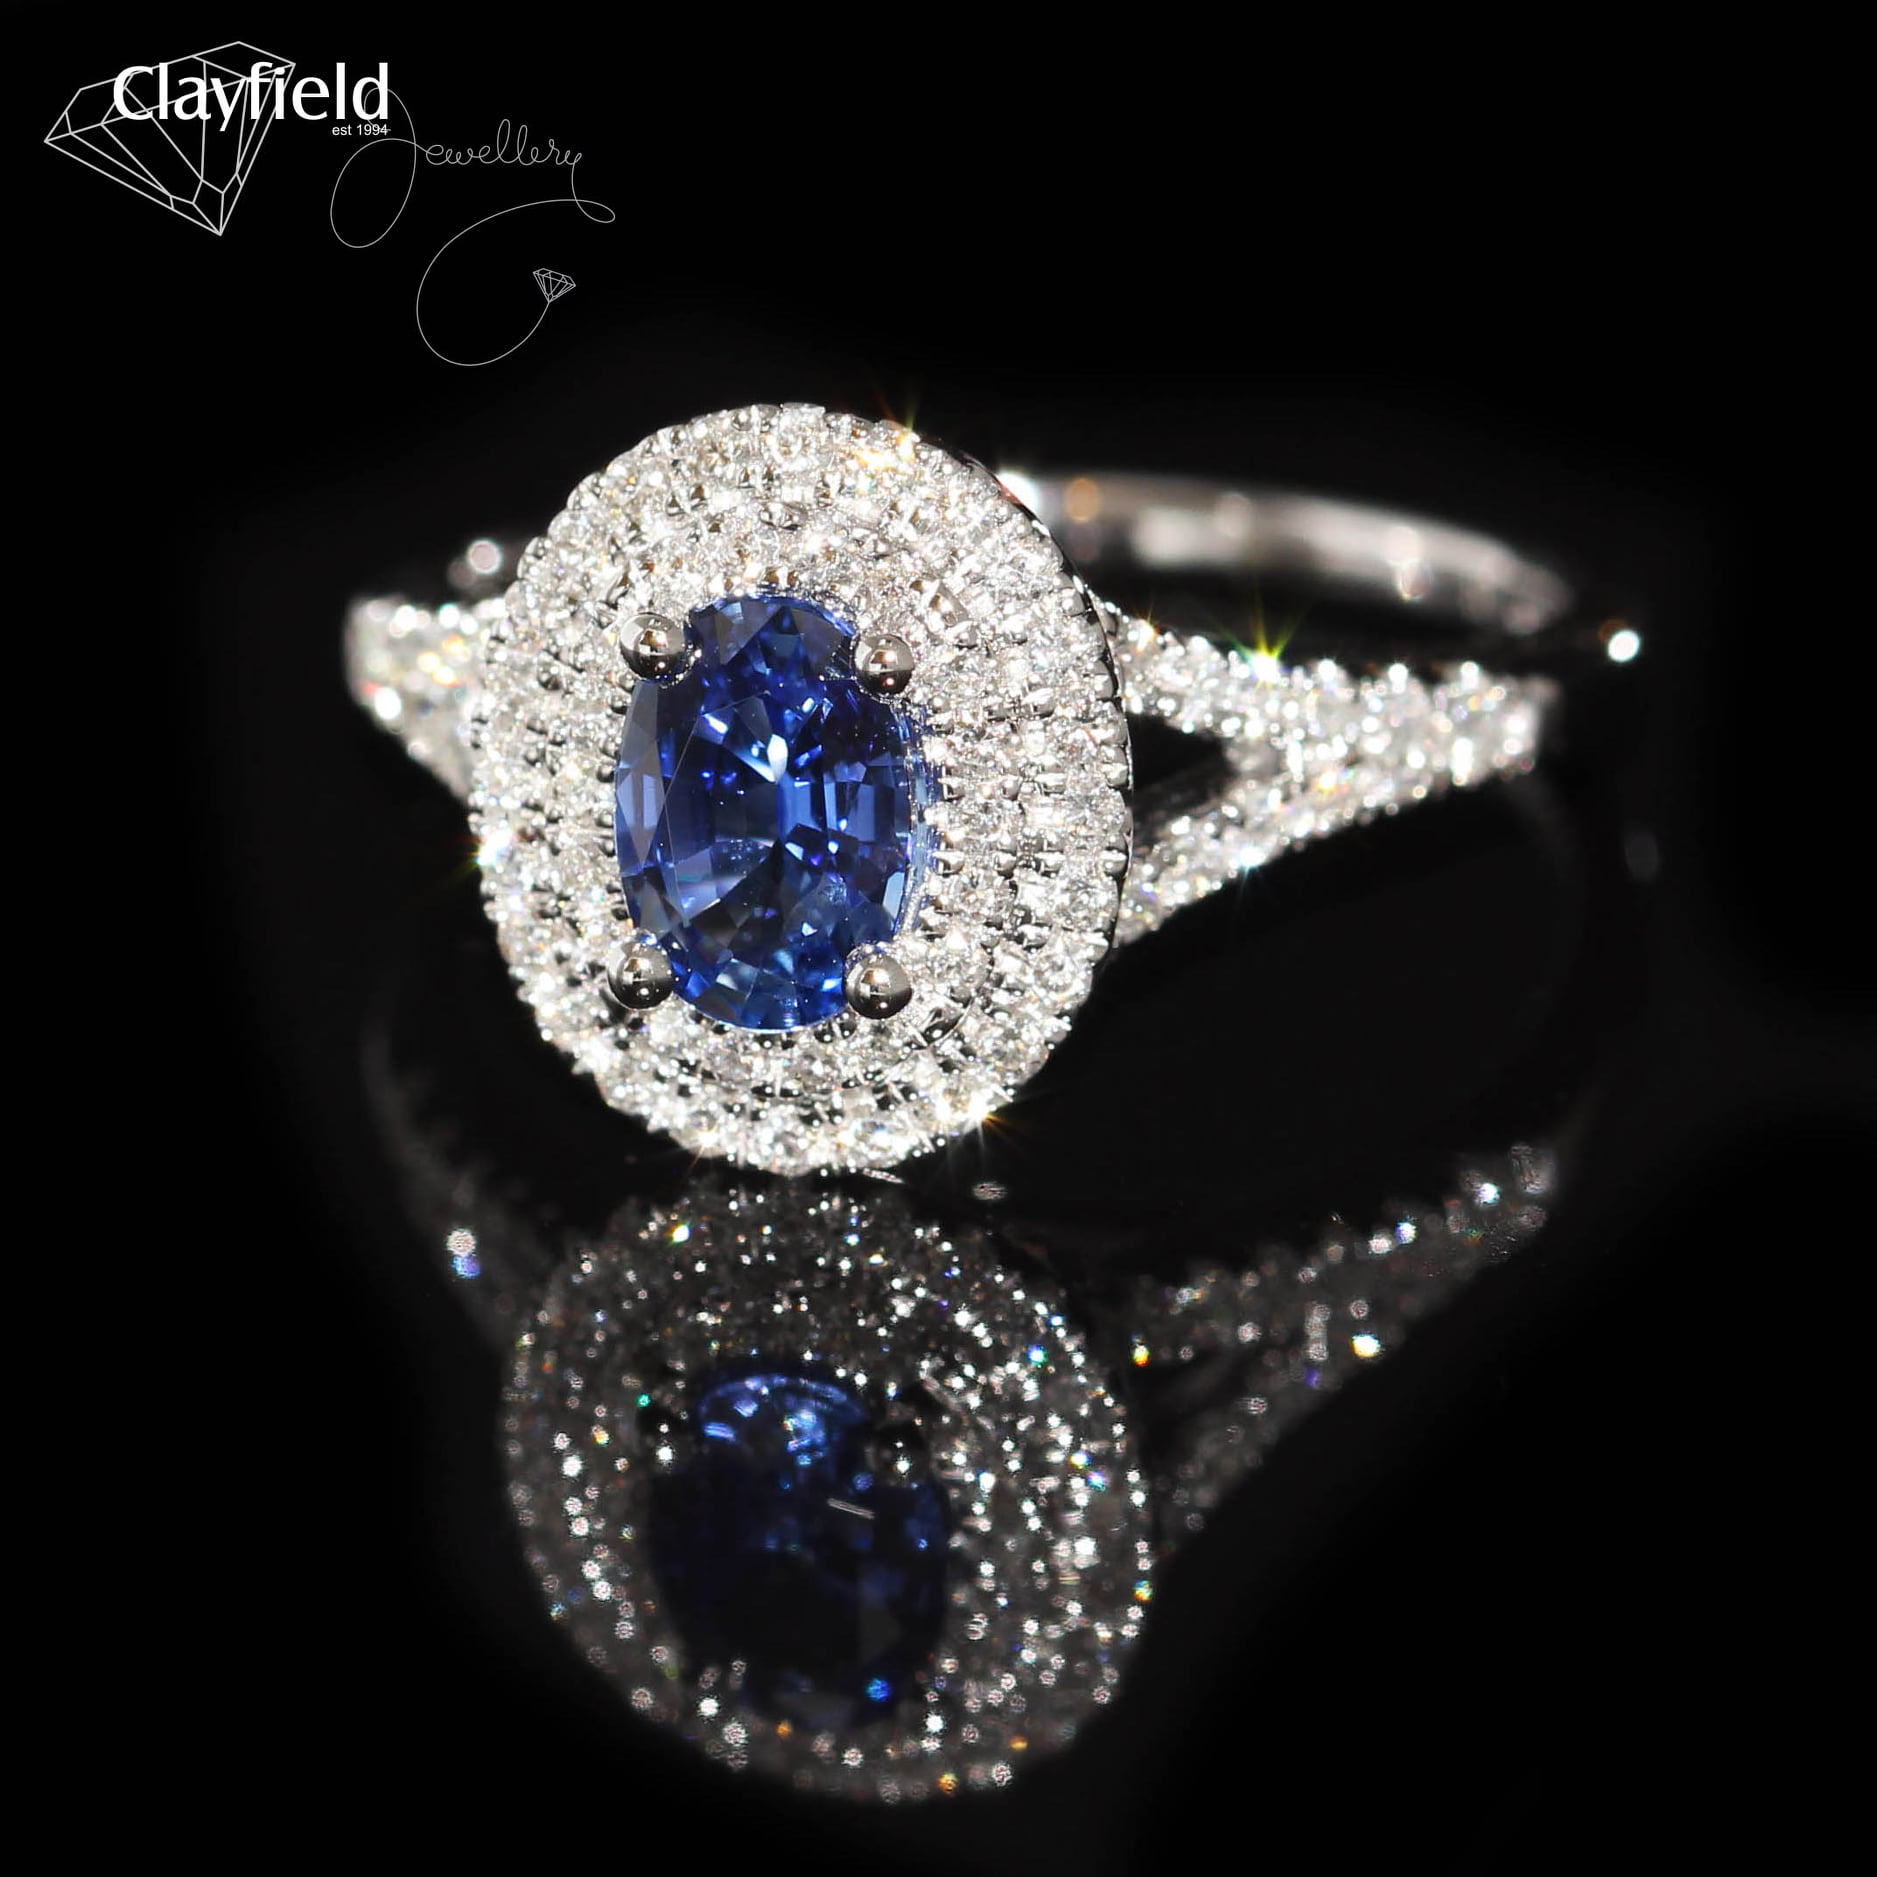 .78ct Sapphire & 62 Diamonds equal to .39cts all set into 18ct White Gold